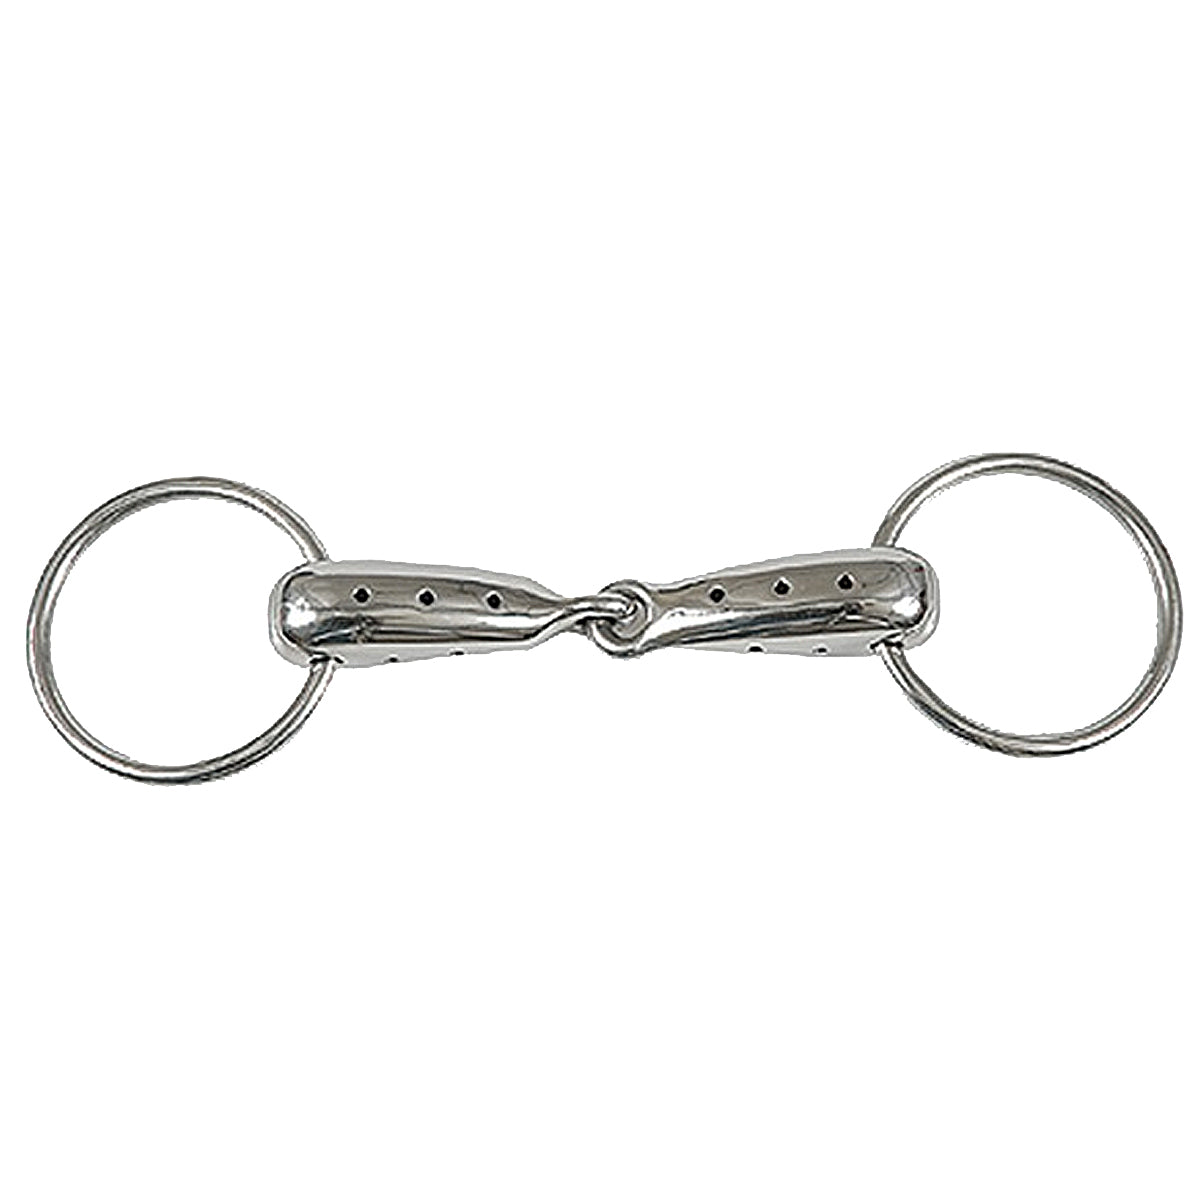 Hollow Mouth Loose Ring Snaffle Bit